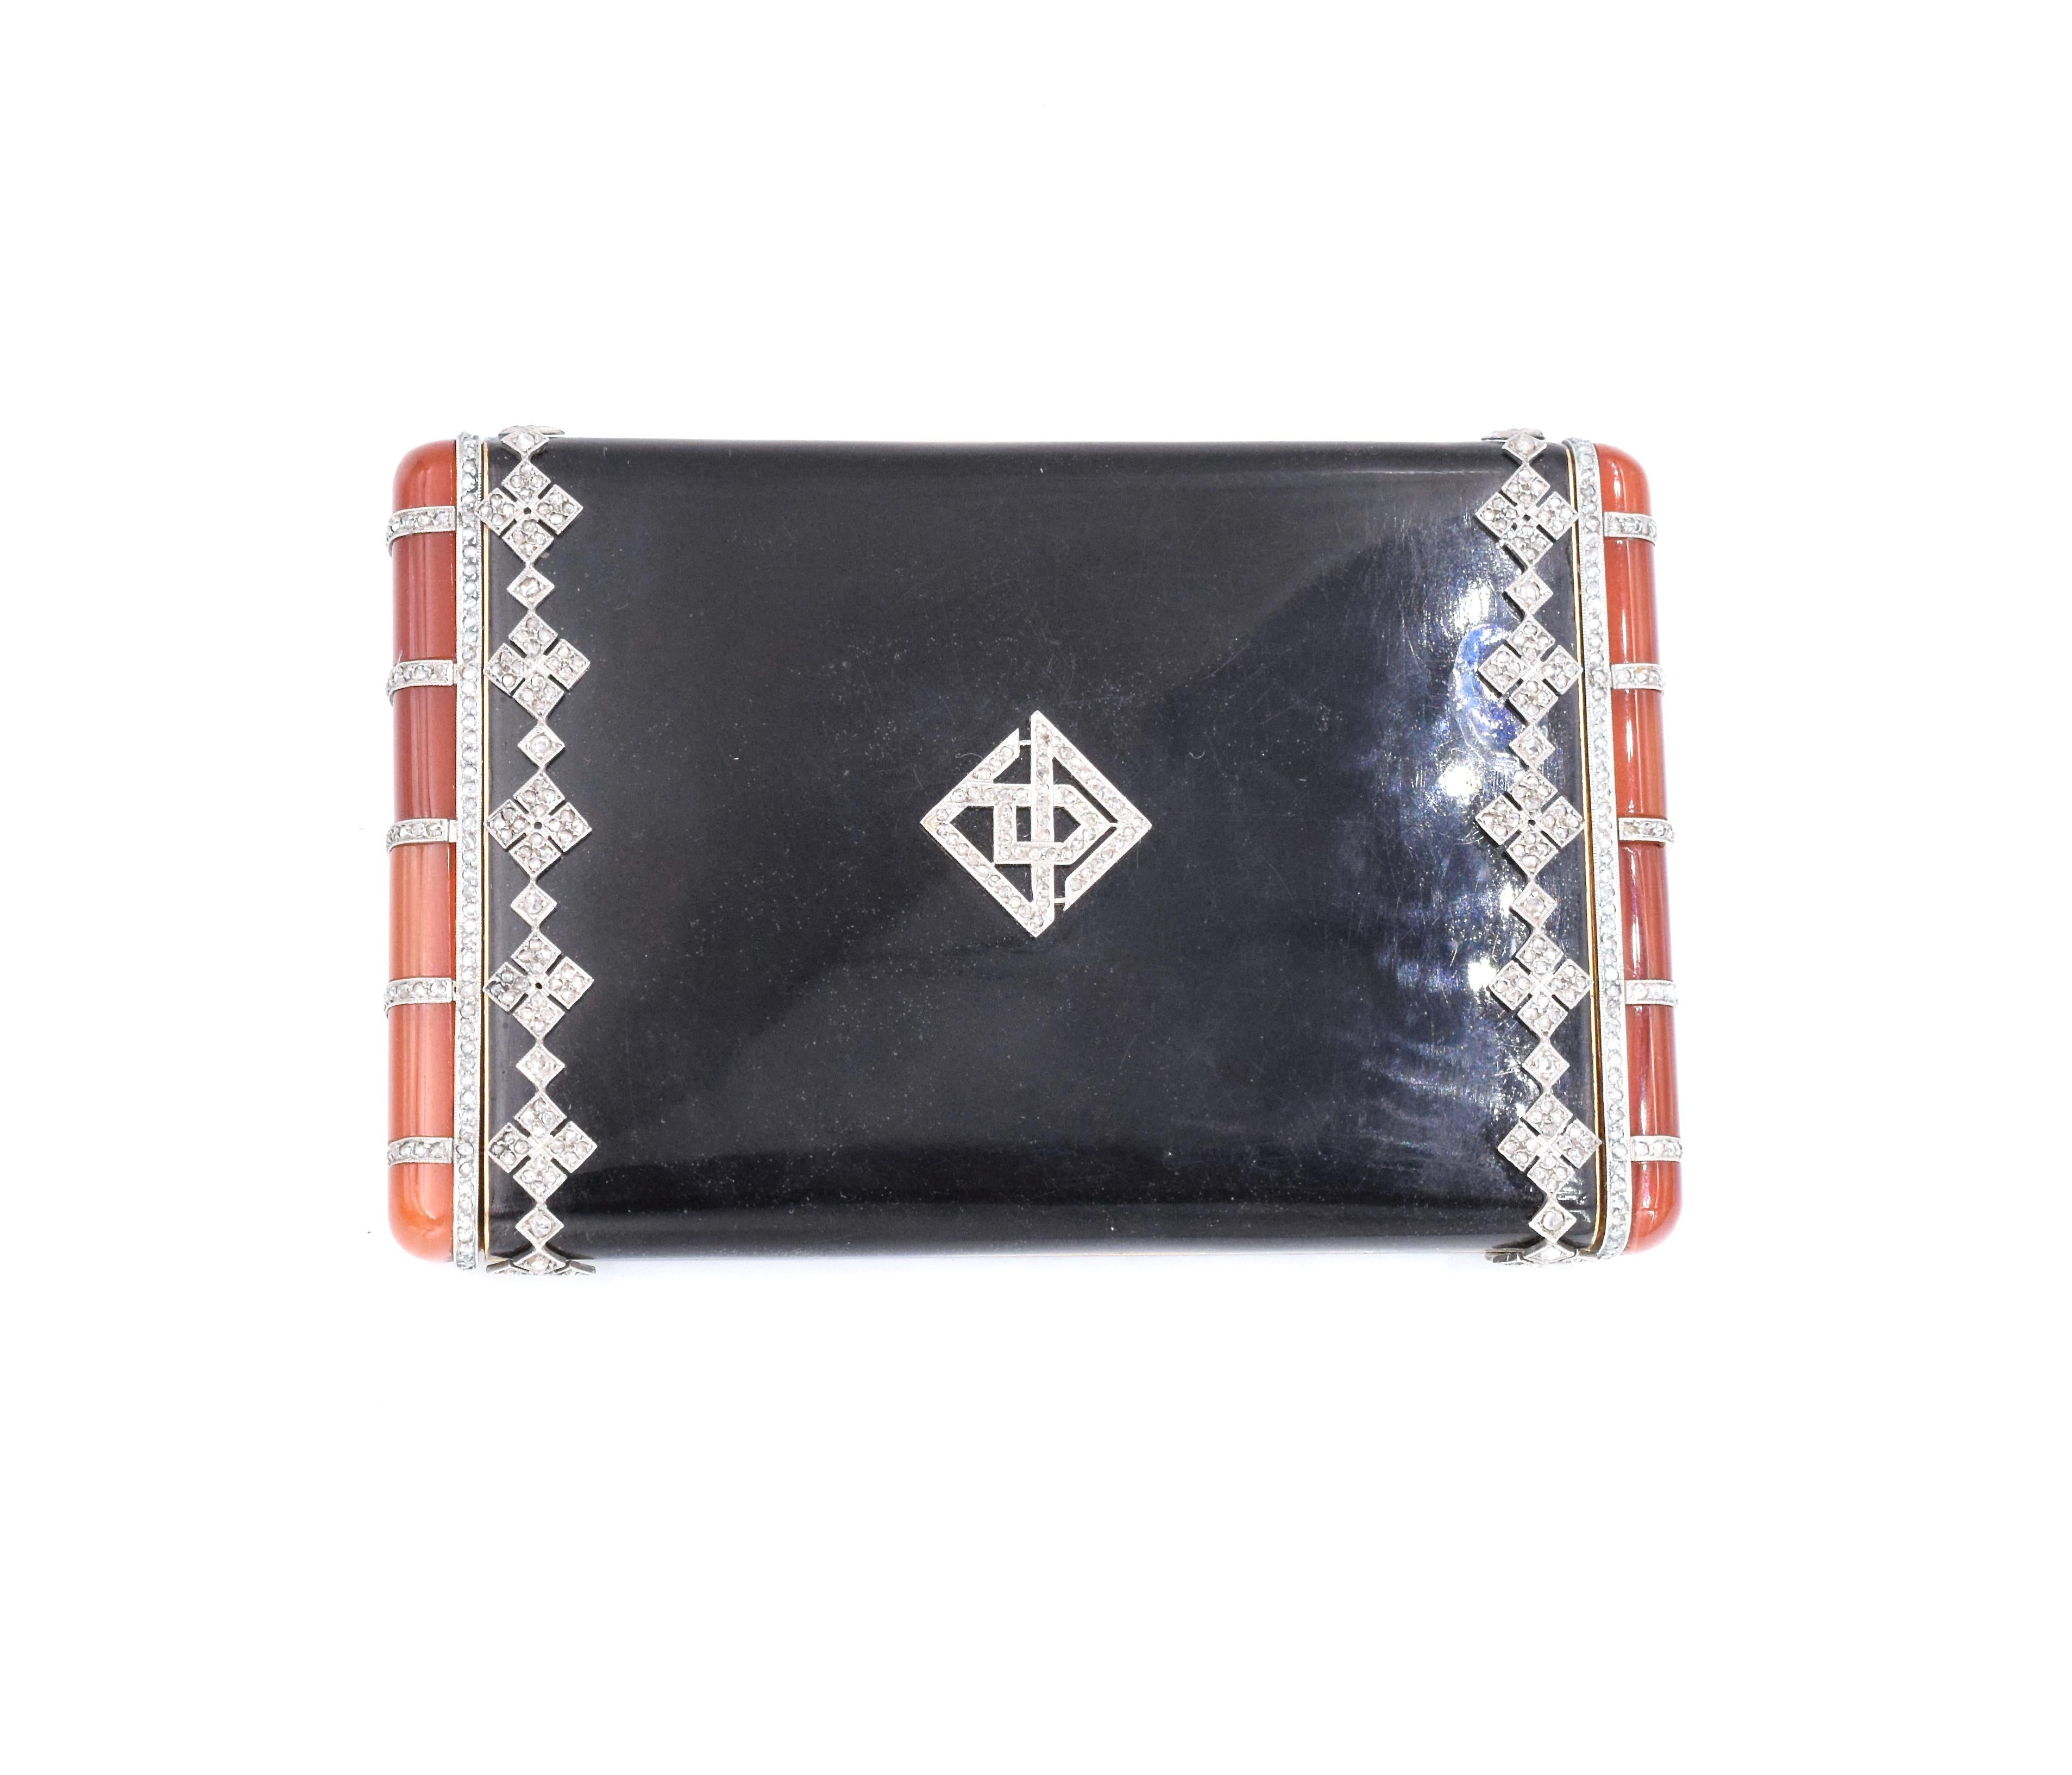 VCA Diamond, Black Enamel, and Orange Gemstone Compact. This compact has diamonds in filigree around the exterior of the box along with orange stones on the ends
. Signed Van Cleef & Arpels, Numbered: xxxx .
 Measurements: 3.5 inches by 2.25 